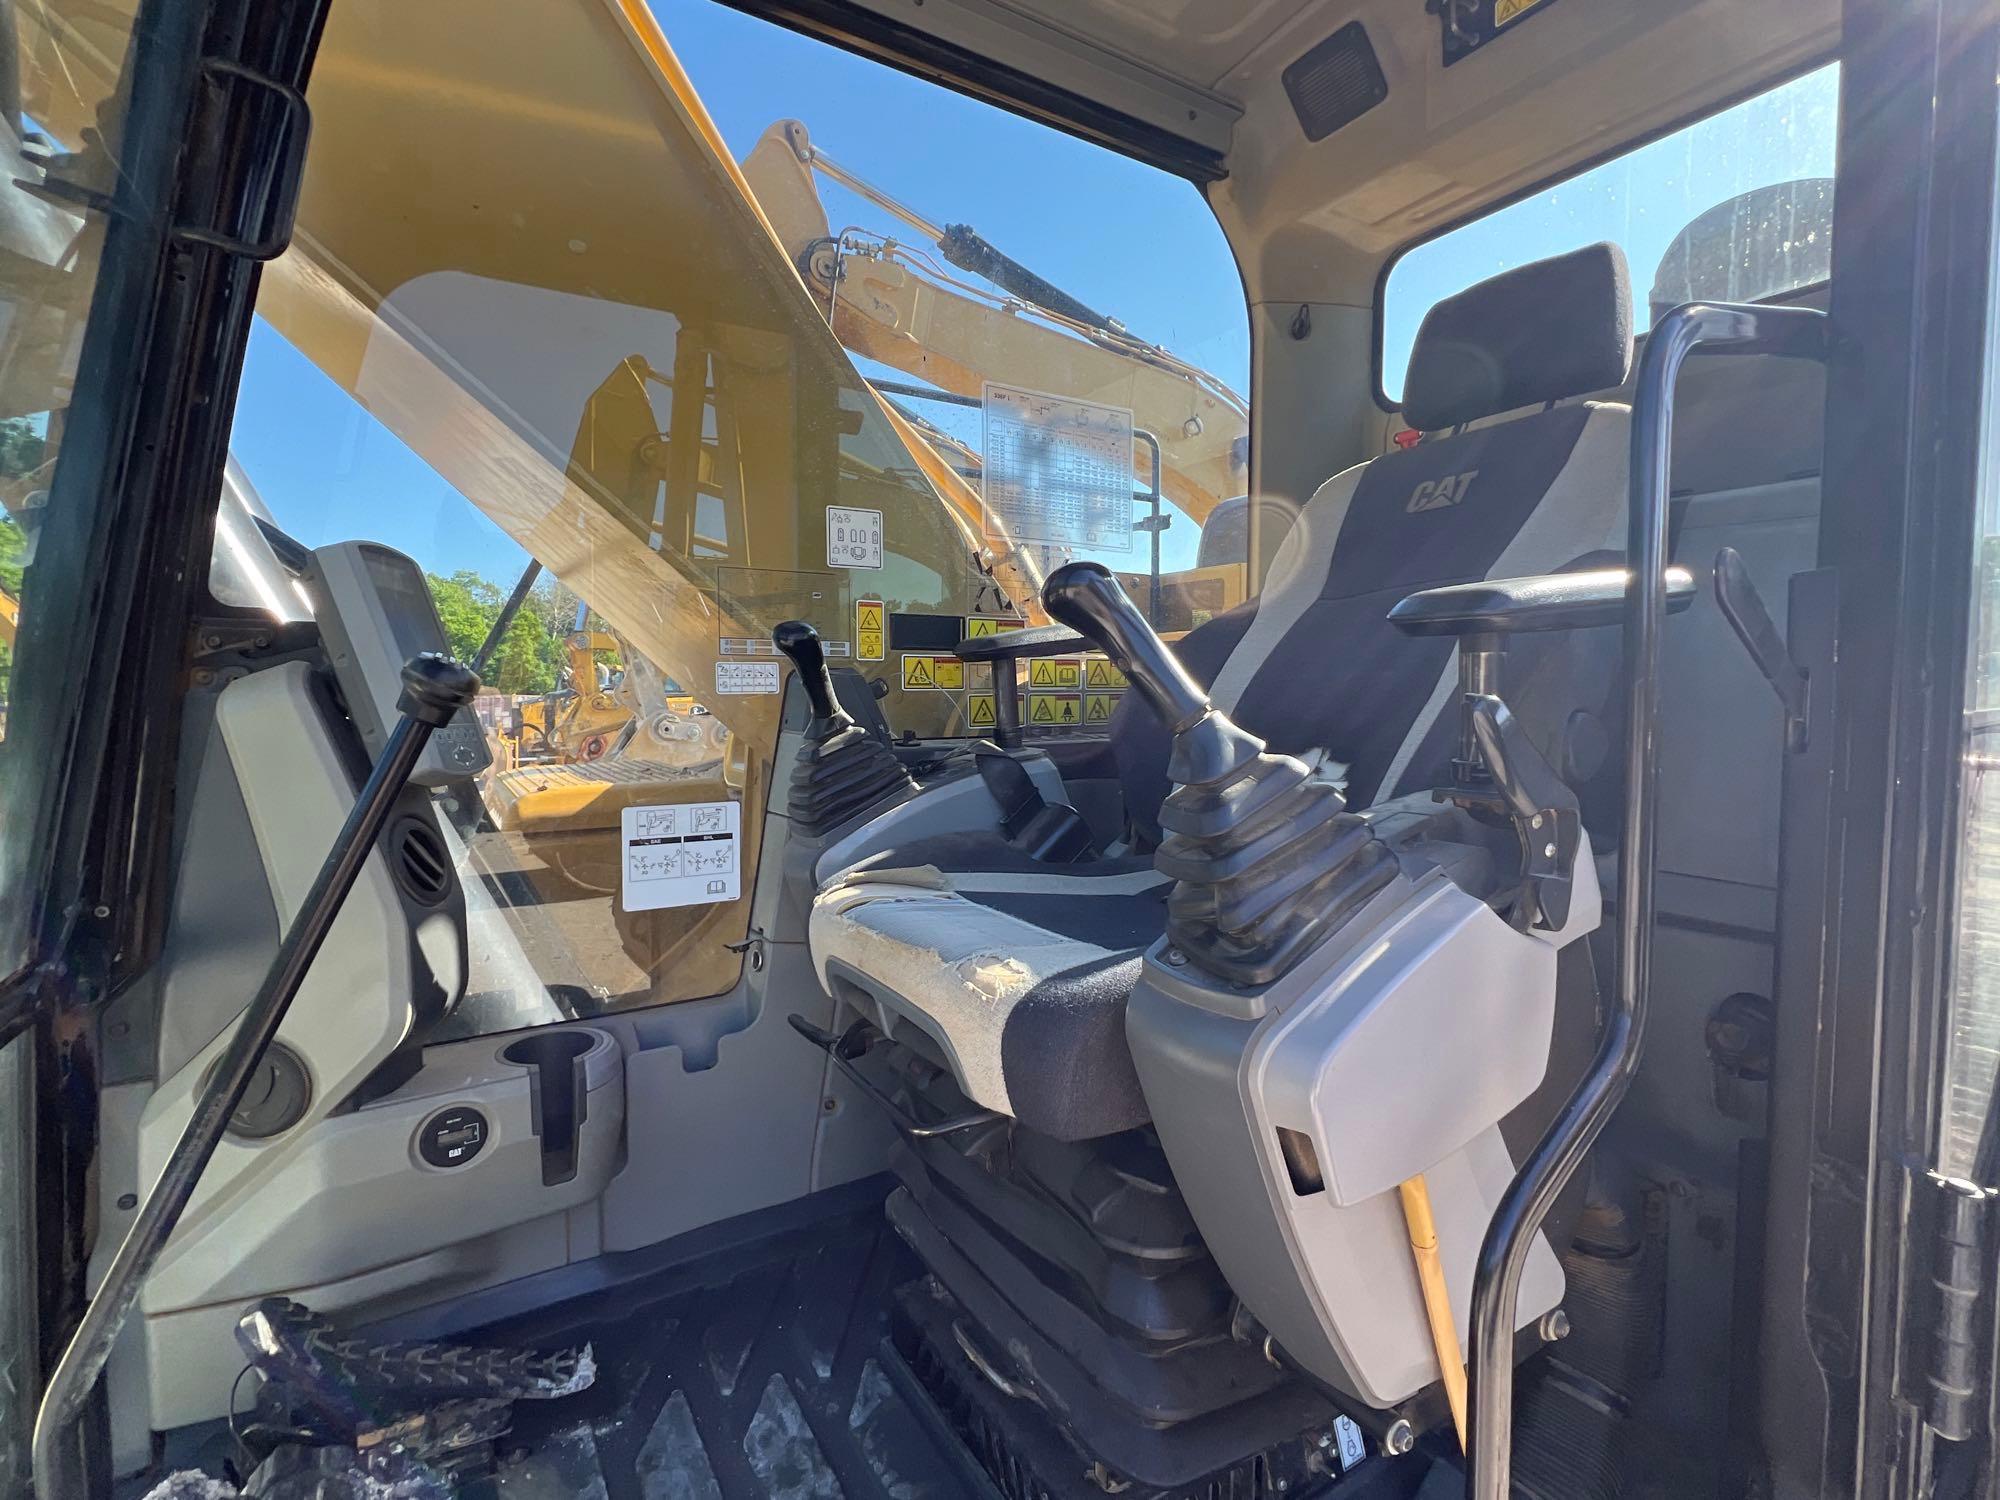 2019 CAT 336FL HYDRAULIC EXCAVATOR SN:RKB21023 powered by Cat diesel engine, equipped with Cab, air,